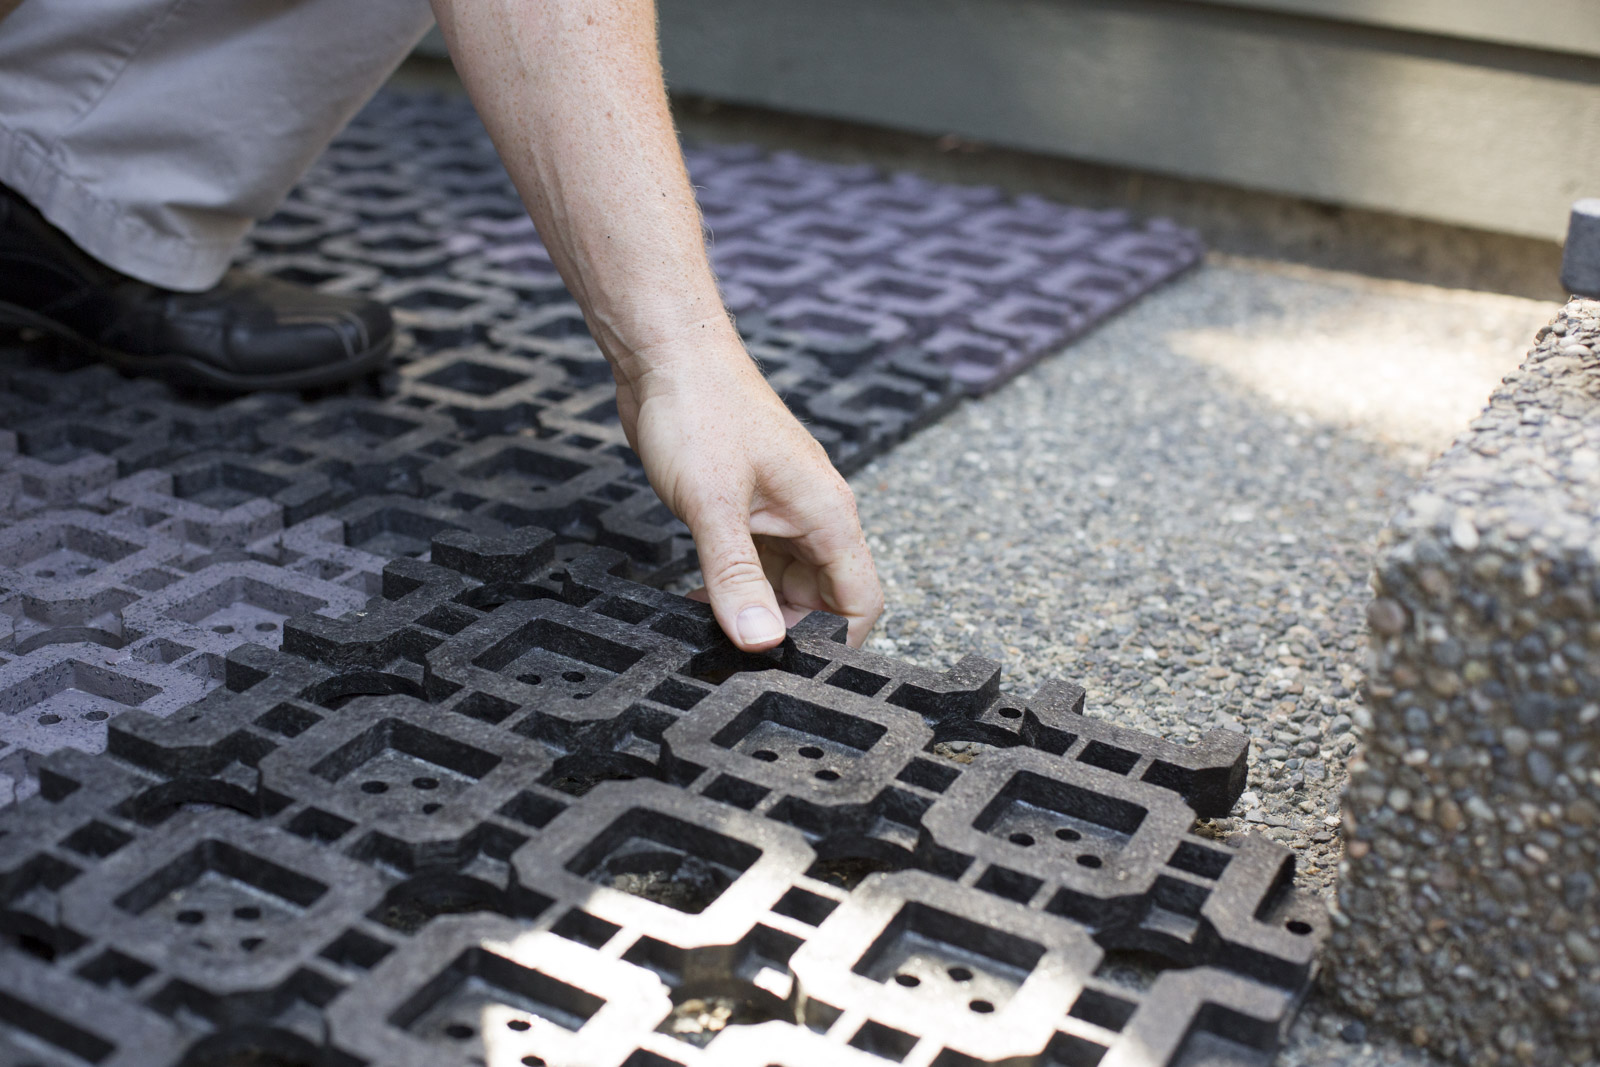 Installing plastic permeable pavers is easy